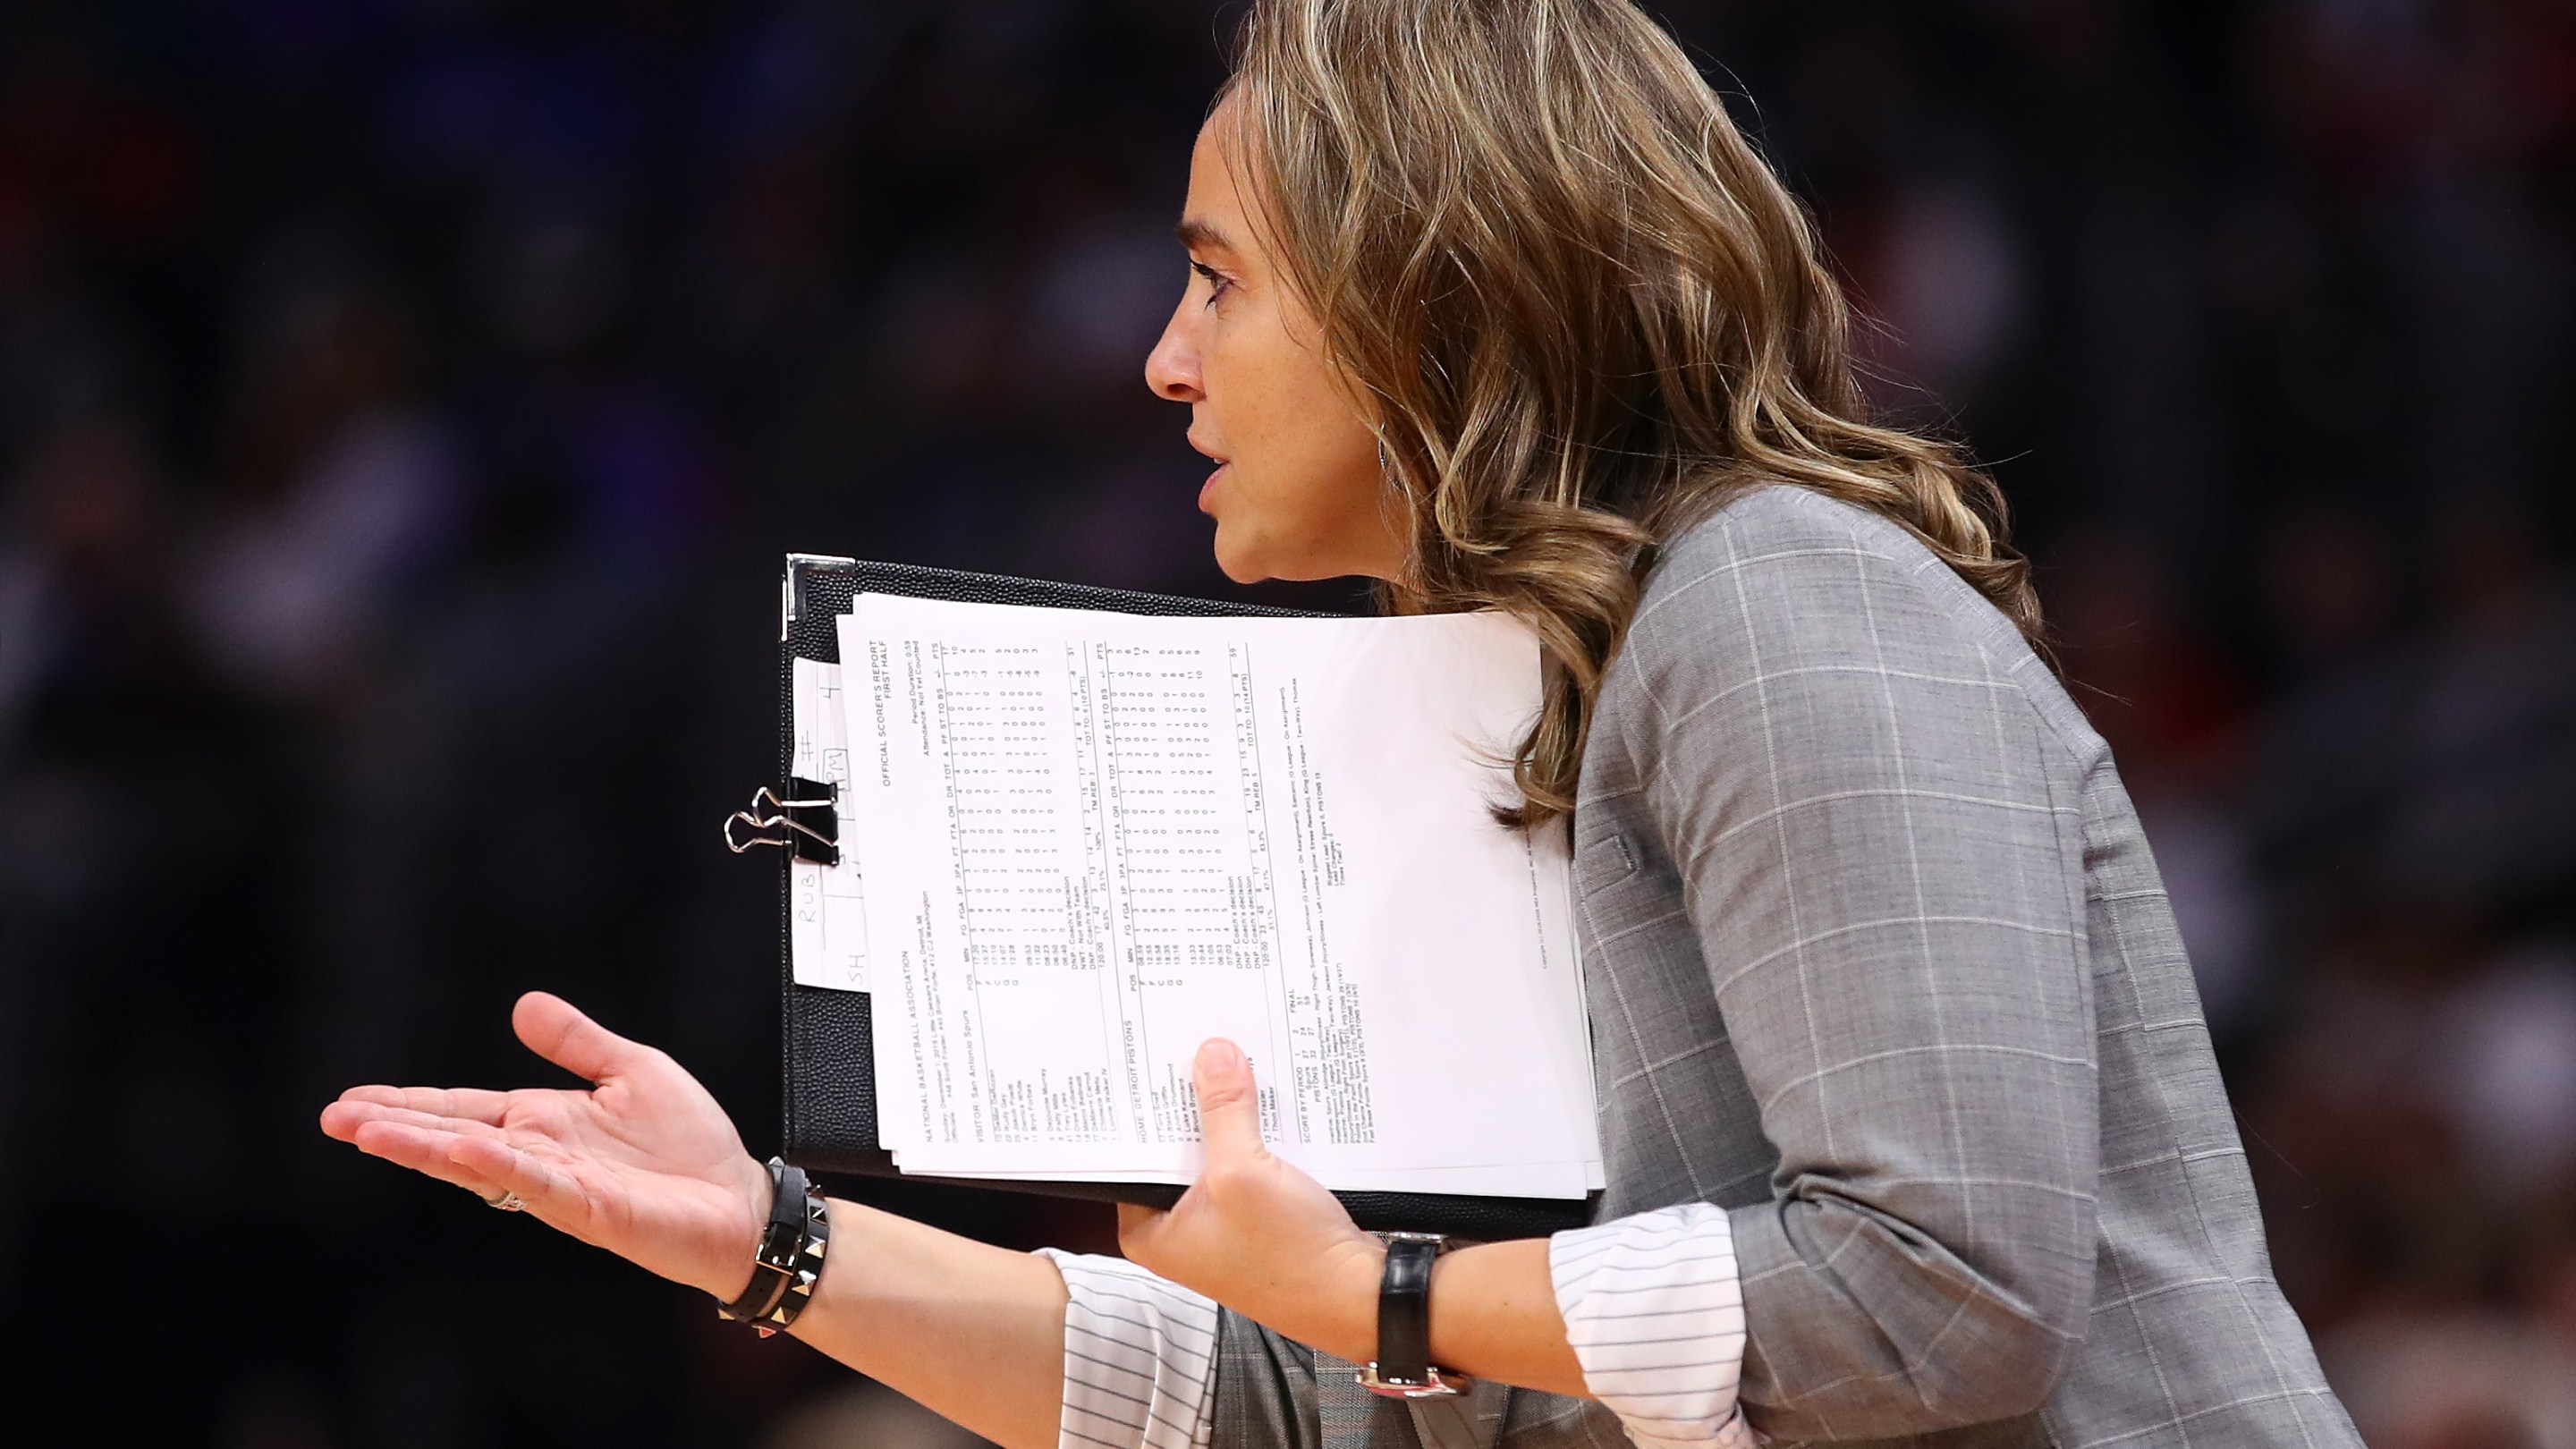 Assistant coach Becky Hammon reacts from the bench while playing the Detroit Pistons at Little Caesars Arena on December 01, 2019 in Detroit, Michigan. Detroit won the game 132-98. NOTE TO USER: User expressly acknowledges and agrees that, by downloading and or using this photograph, User is consenting to the terms and conditions of the Getty Images License Agreement.